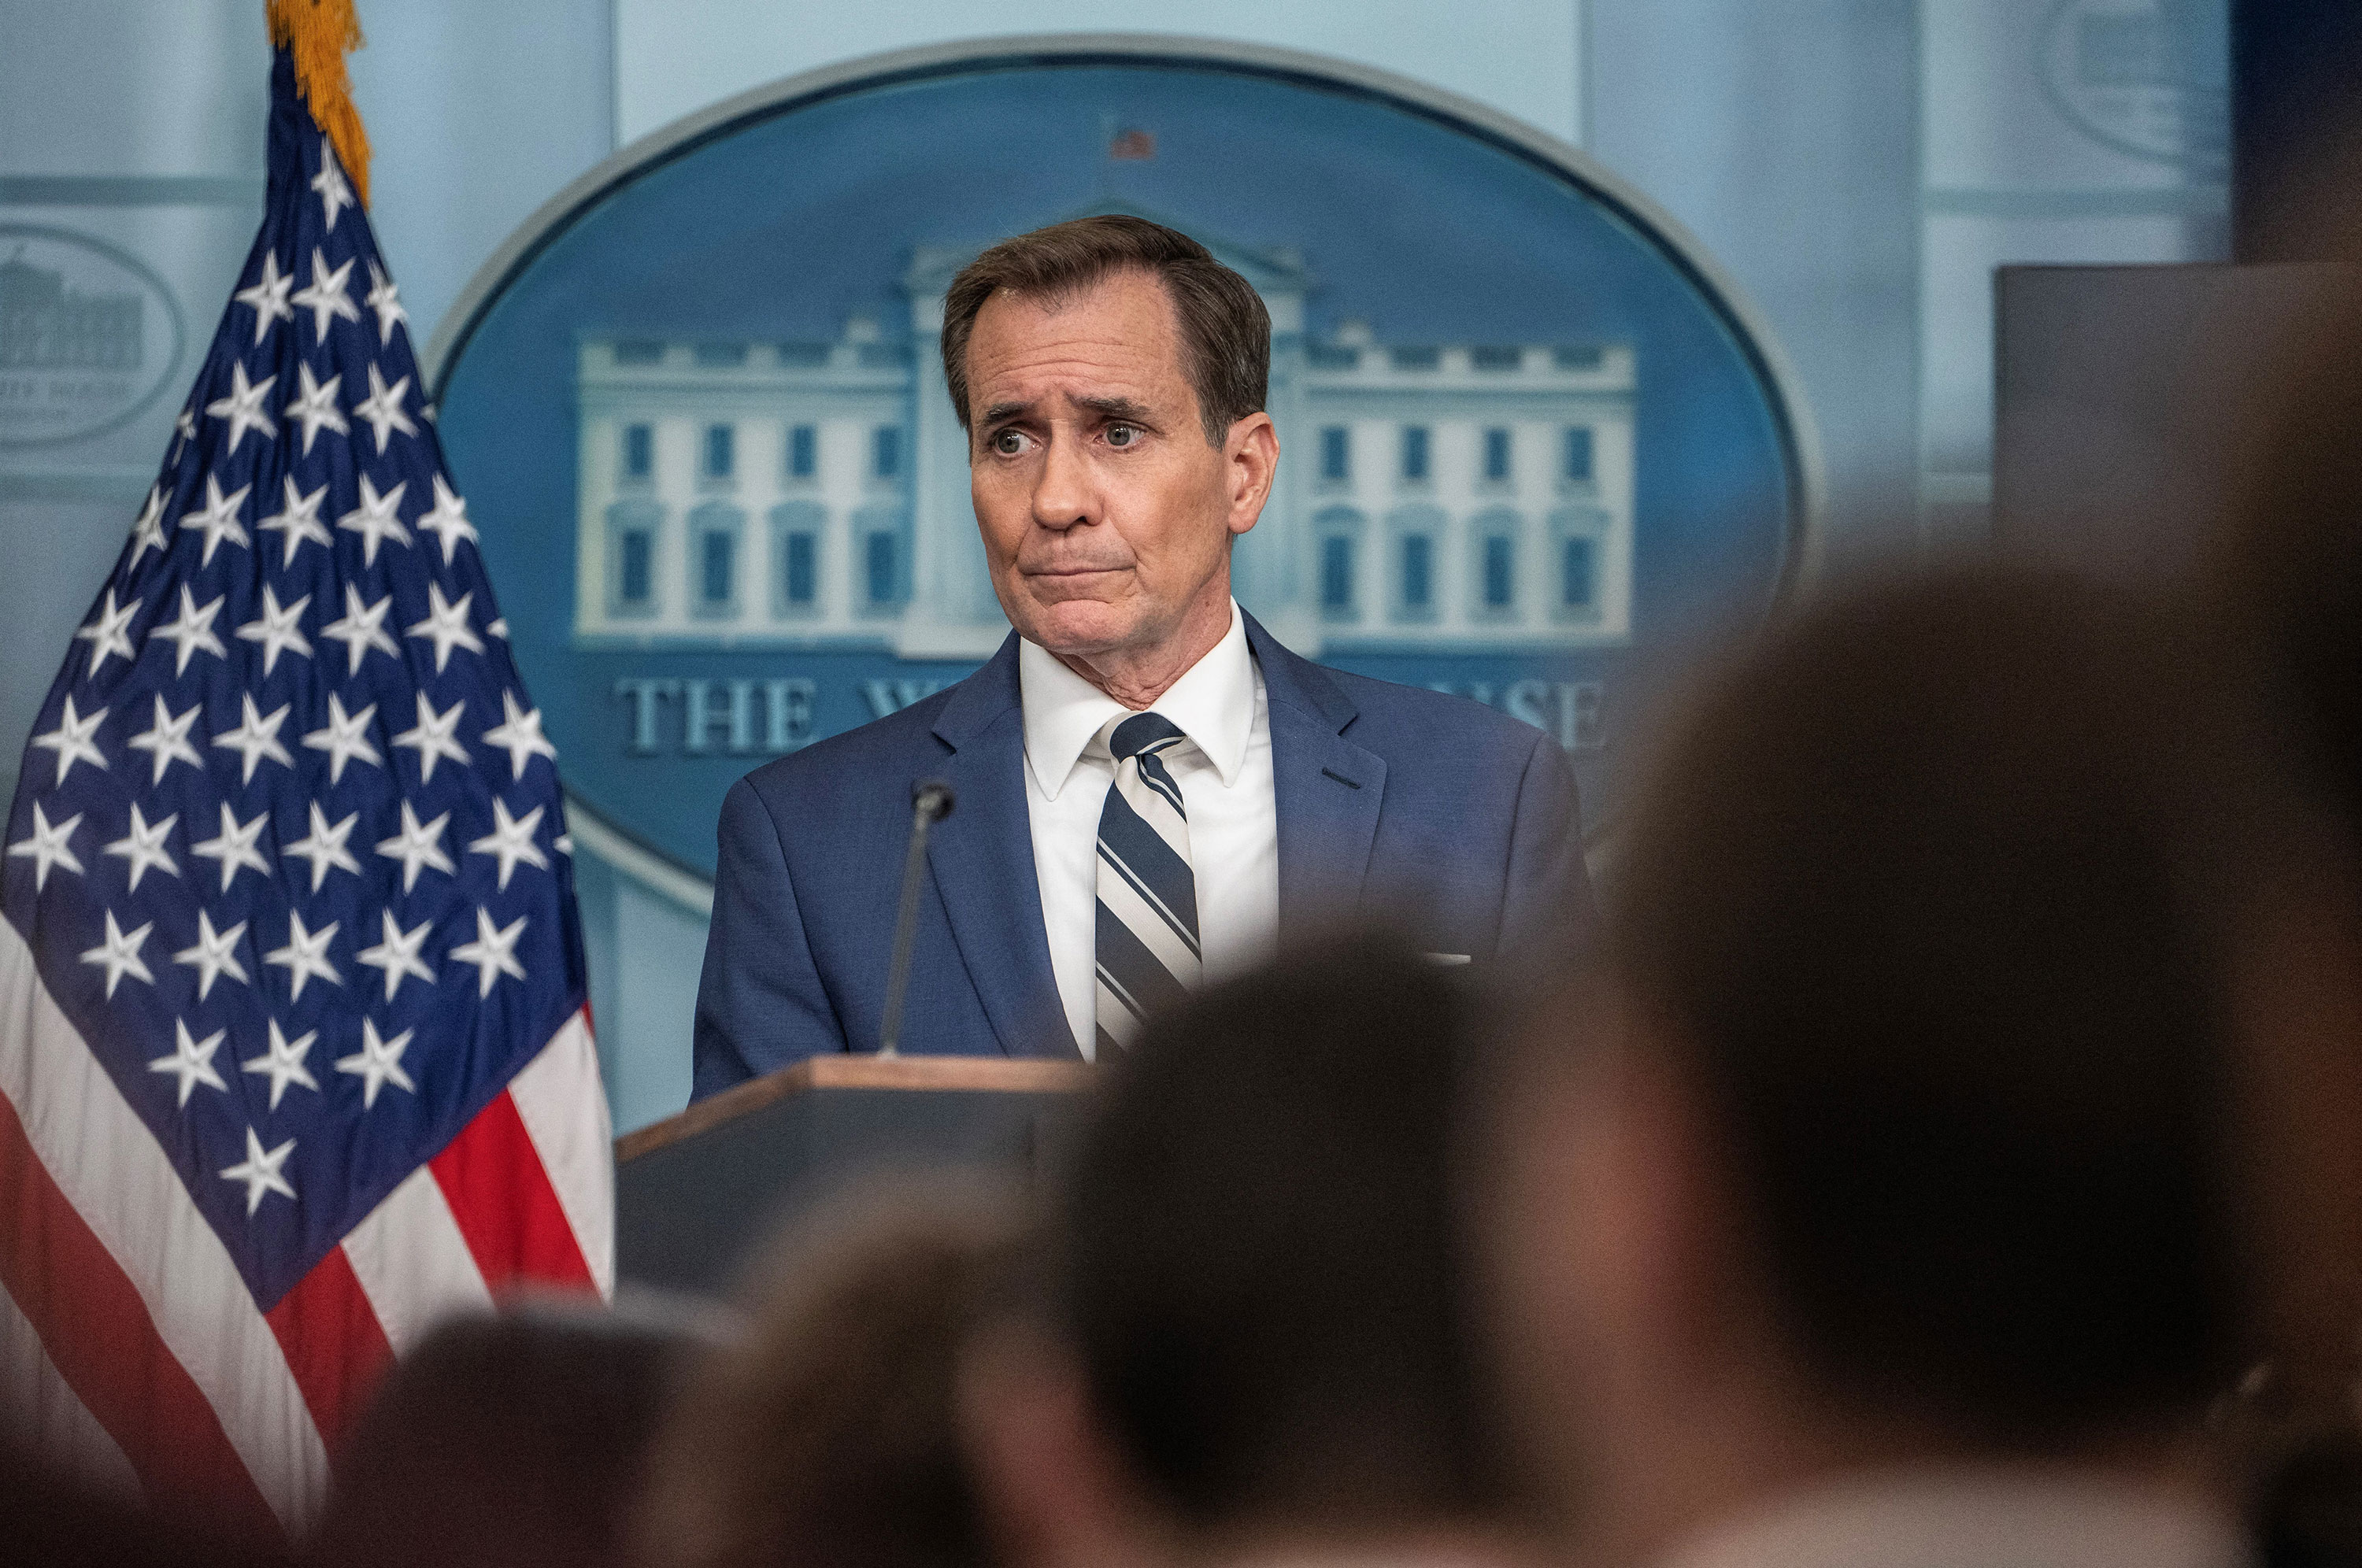 National Security Council spokesman John Kirby speaks during the daily briefing at the White House in Washington, DC, on May 17.